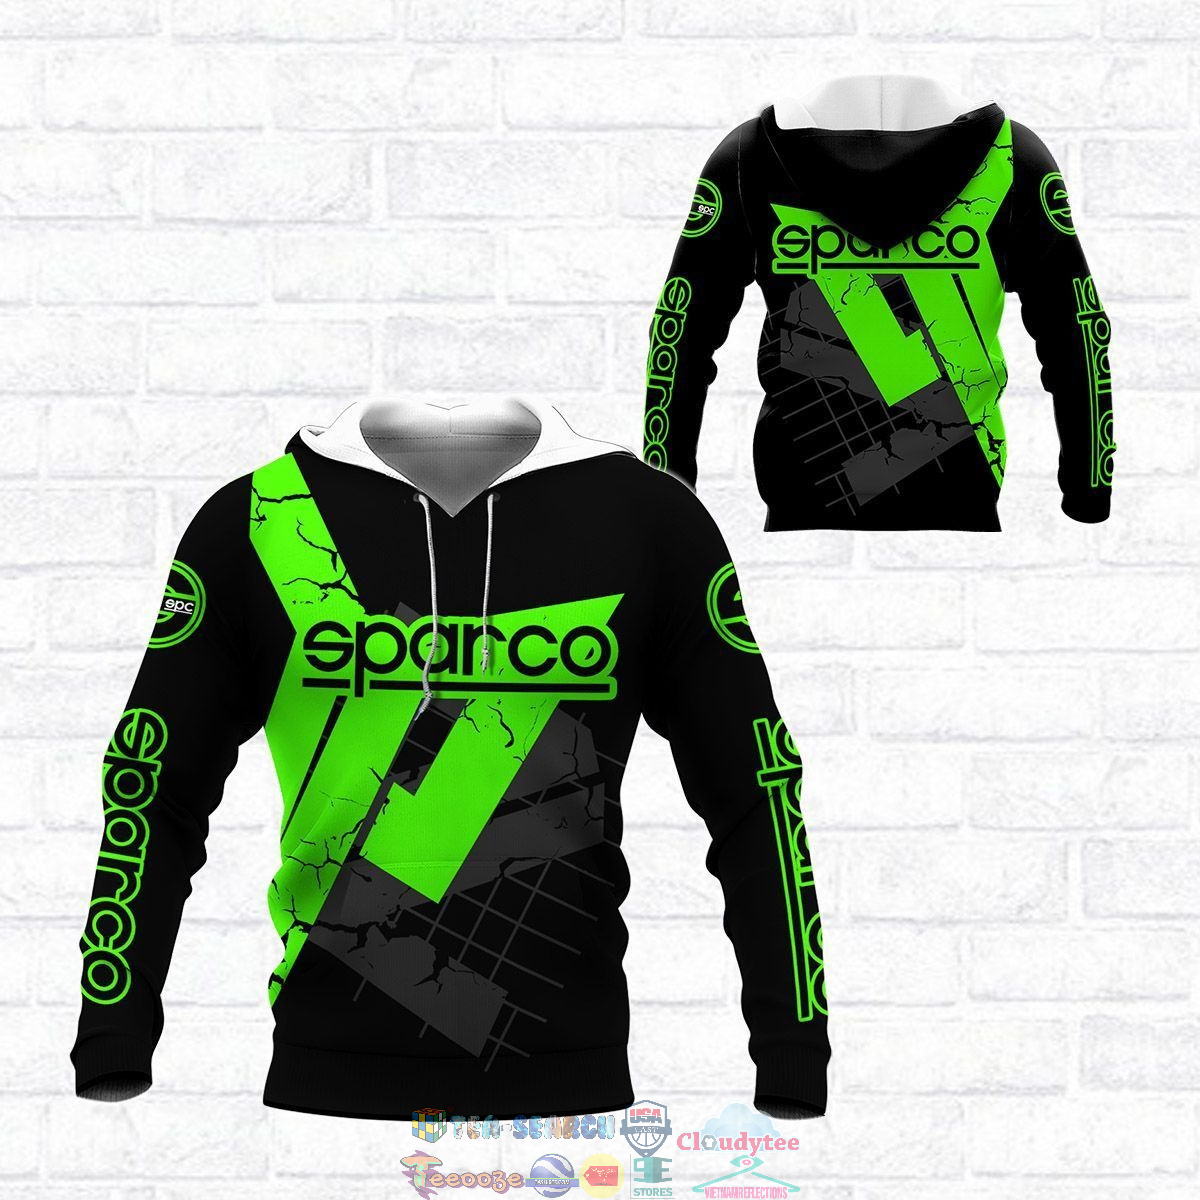 Sparco ver 60 3D hoodie and t-shirt